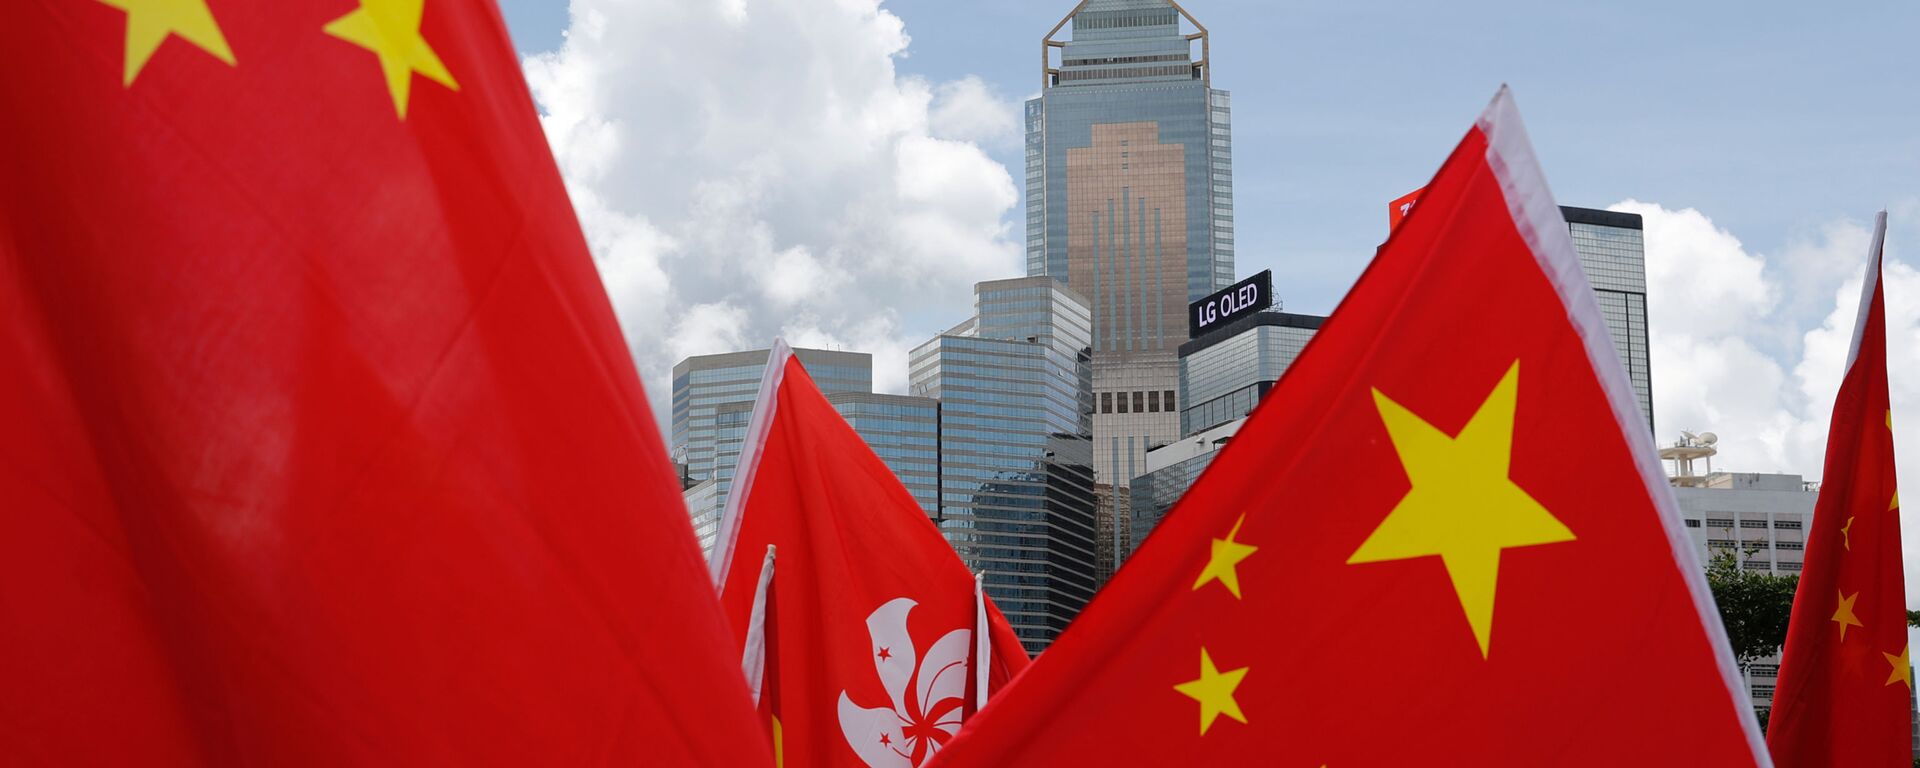 Buildings are seen above Hong Kong and Chinese flags, as pro-China supporters celebration after China's parliament passes national security law for Hong Kong, in Hong Kong, China June 30, 2020. REUTERS/Tyrone Siu - Sputnik International, 1920, 11.03.2021